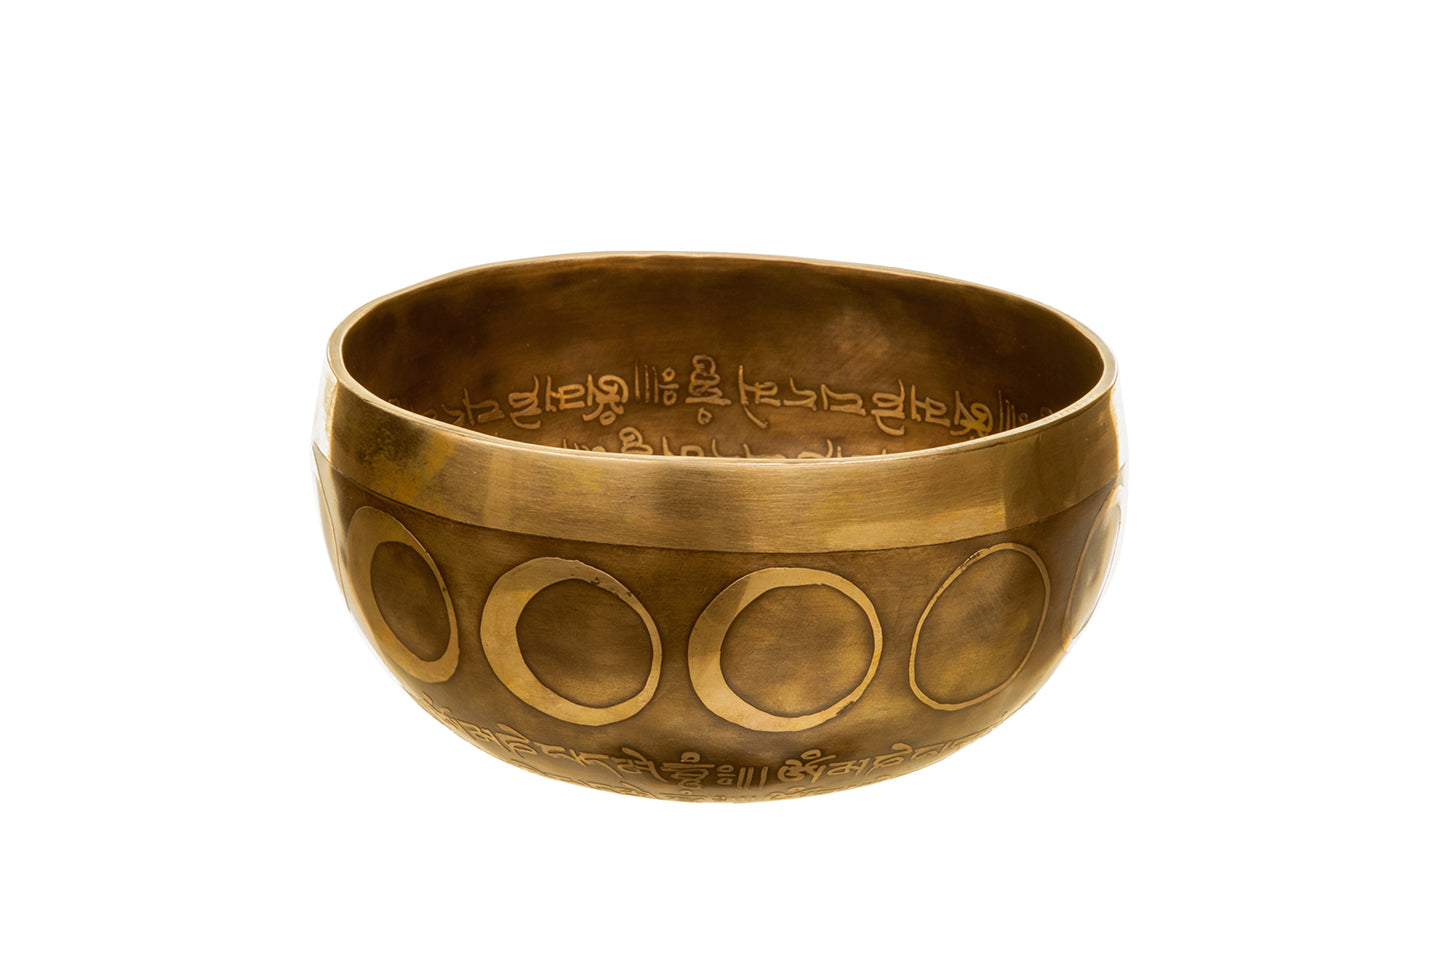 The Inner Space Bowl: 6 Inch Handmade Bronze Singing Bowl From Nepal Moon and Star Design